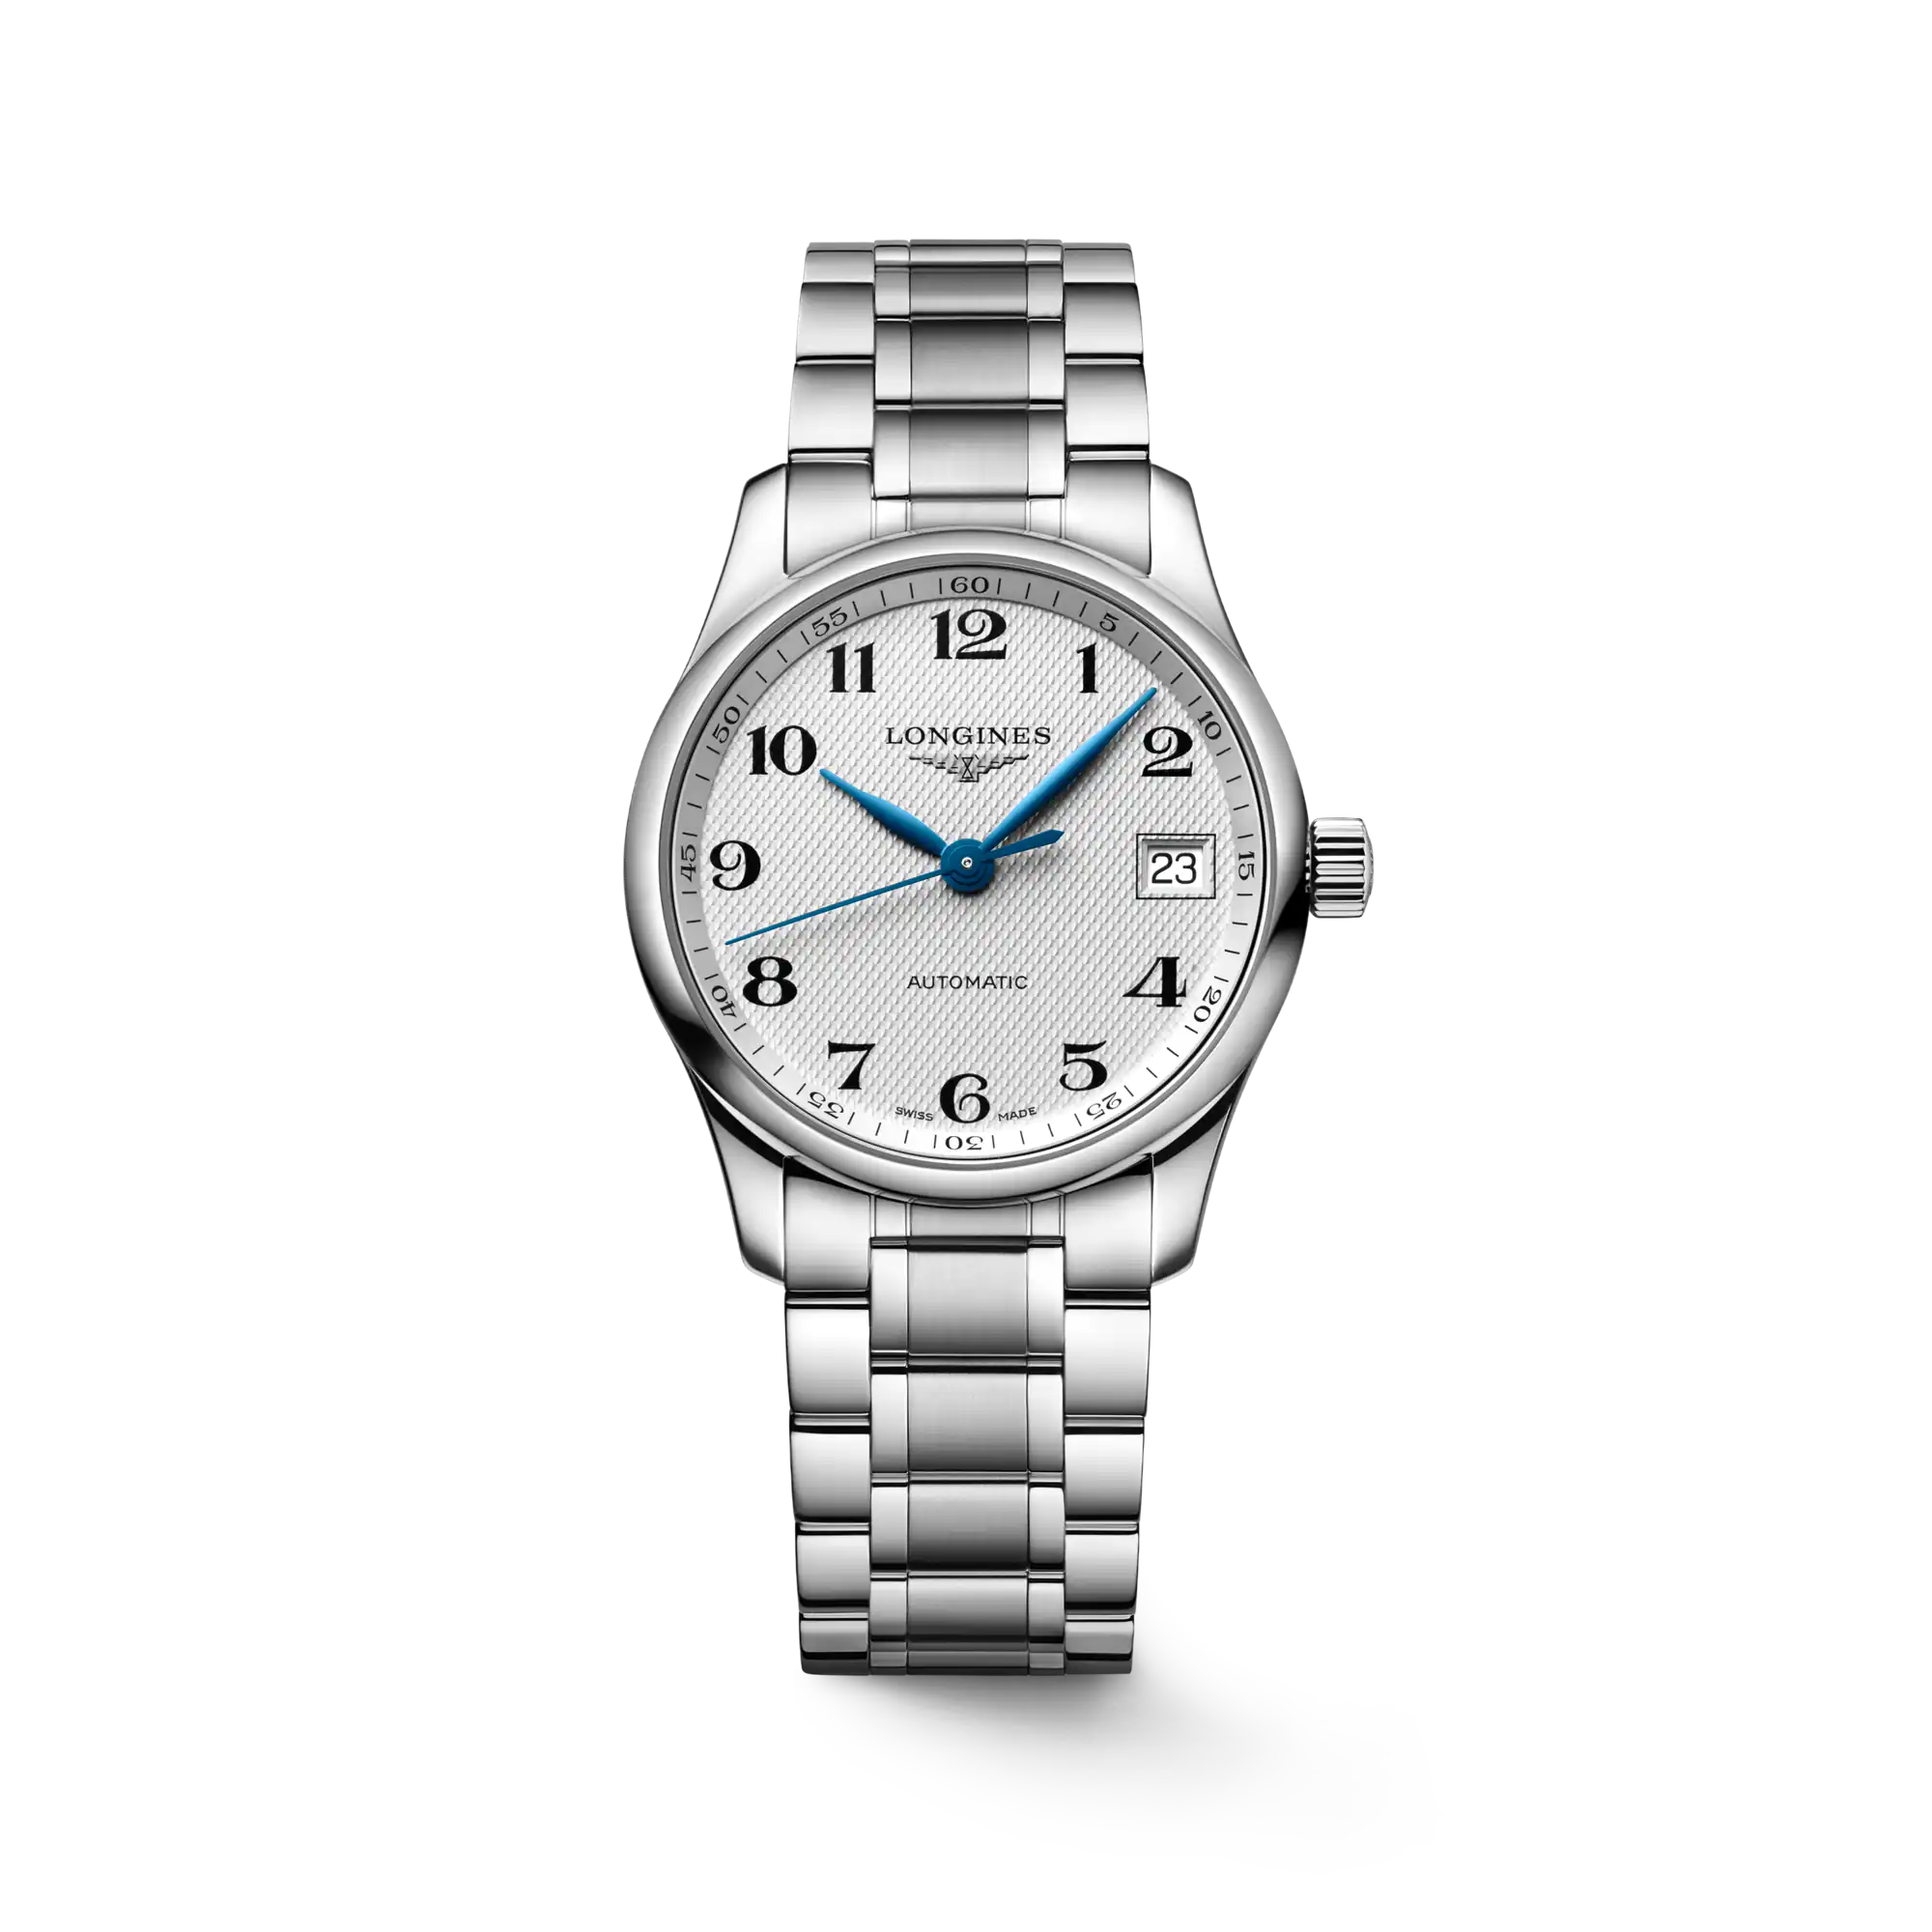 The Longines Master Collection Automatic Women's Watch L23574786